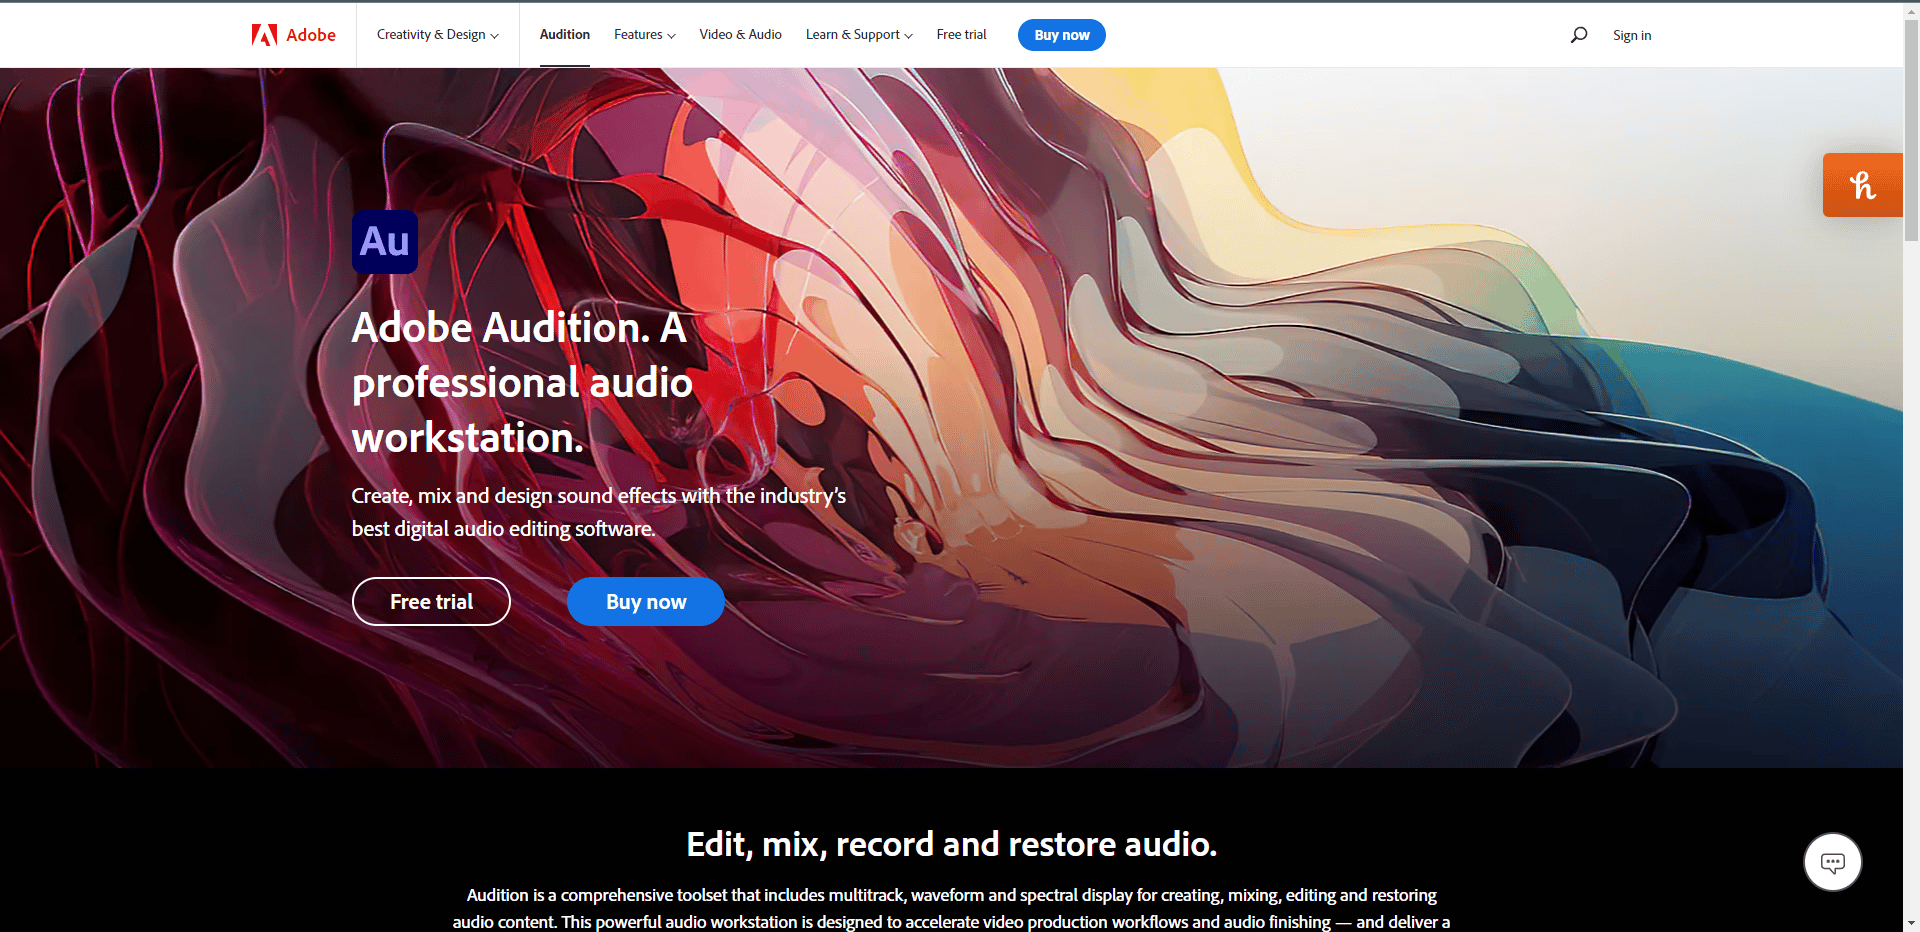 Adobe Audition official website